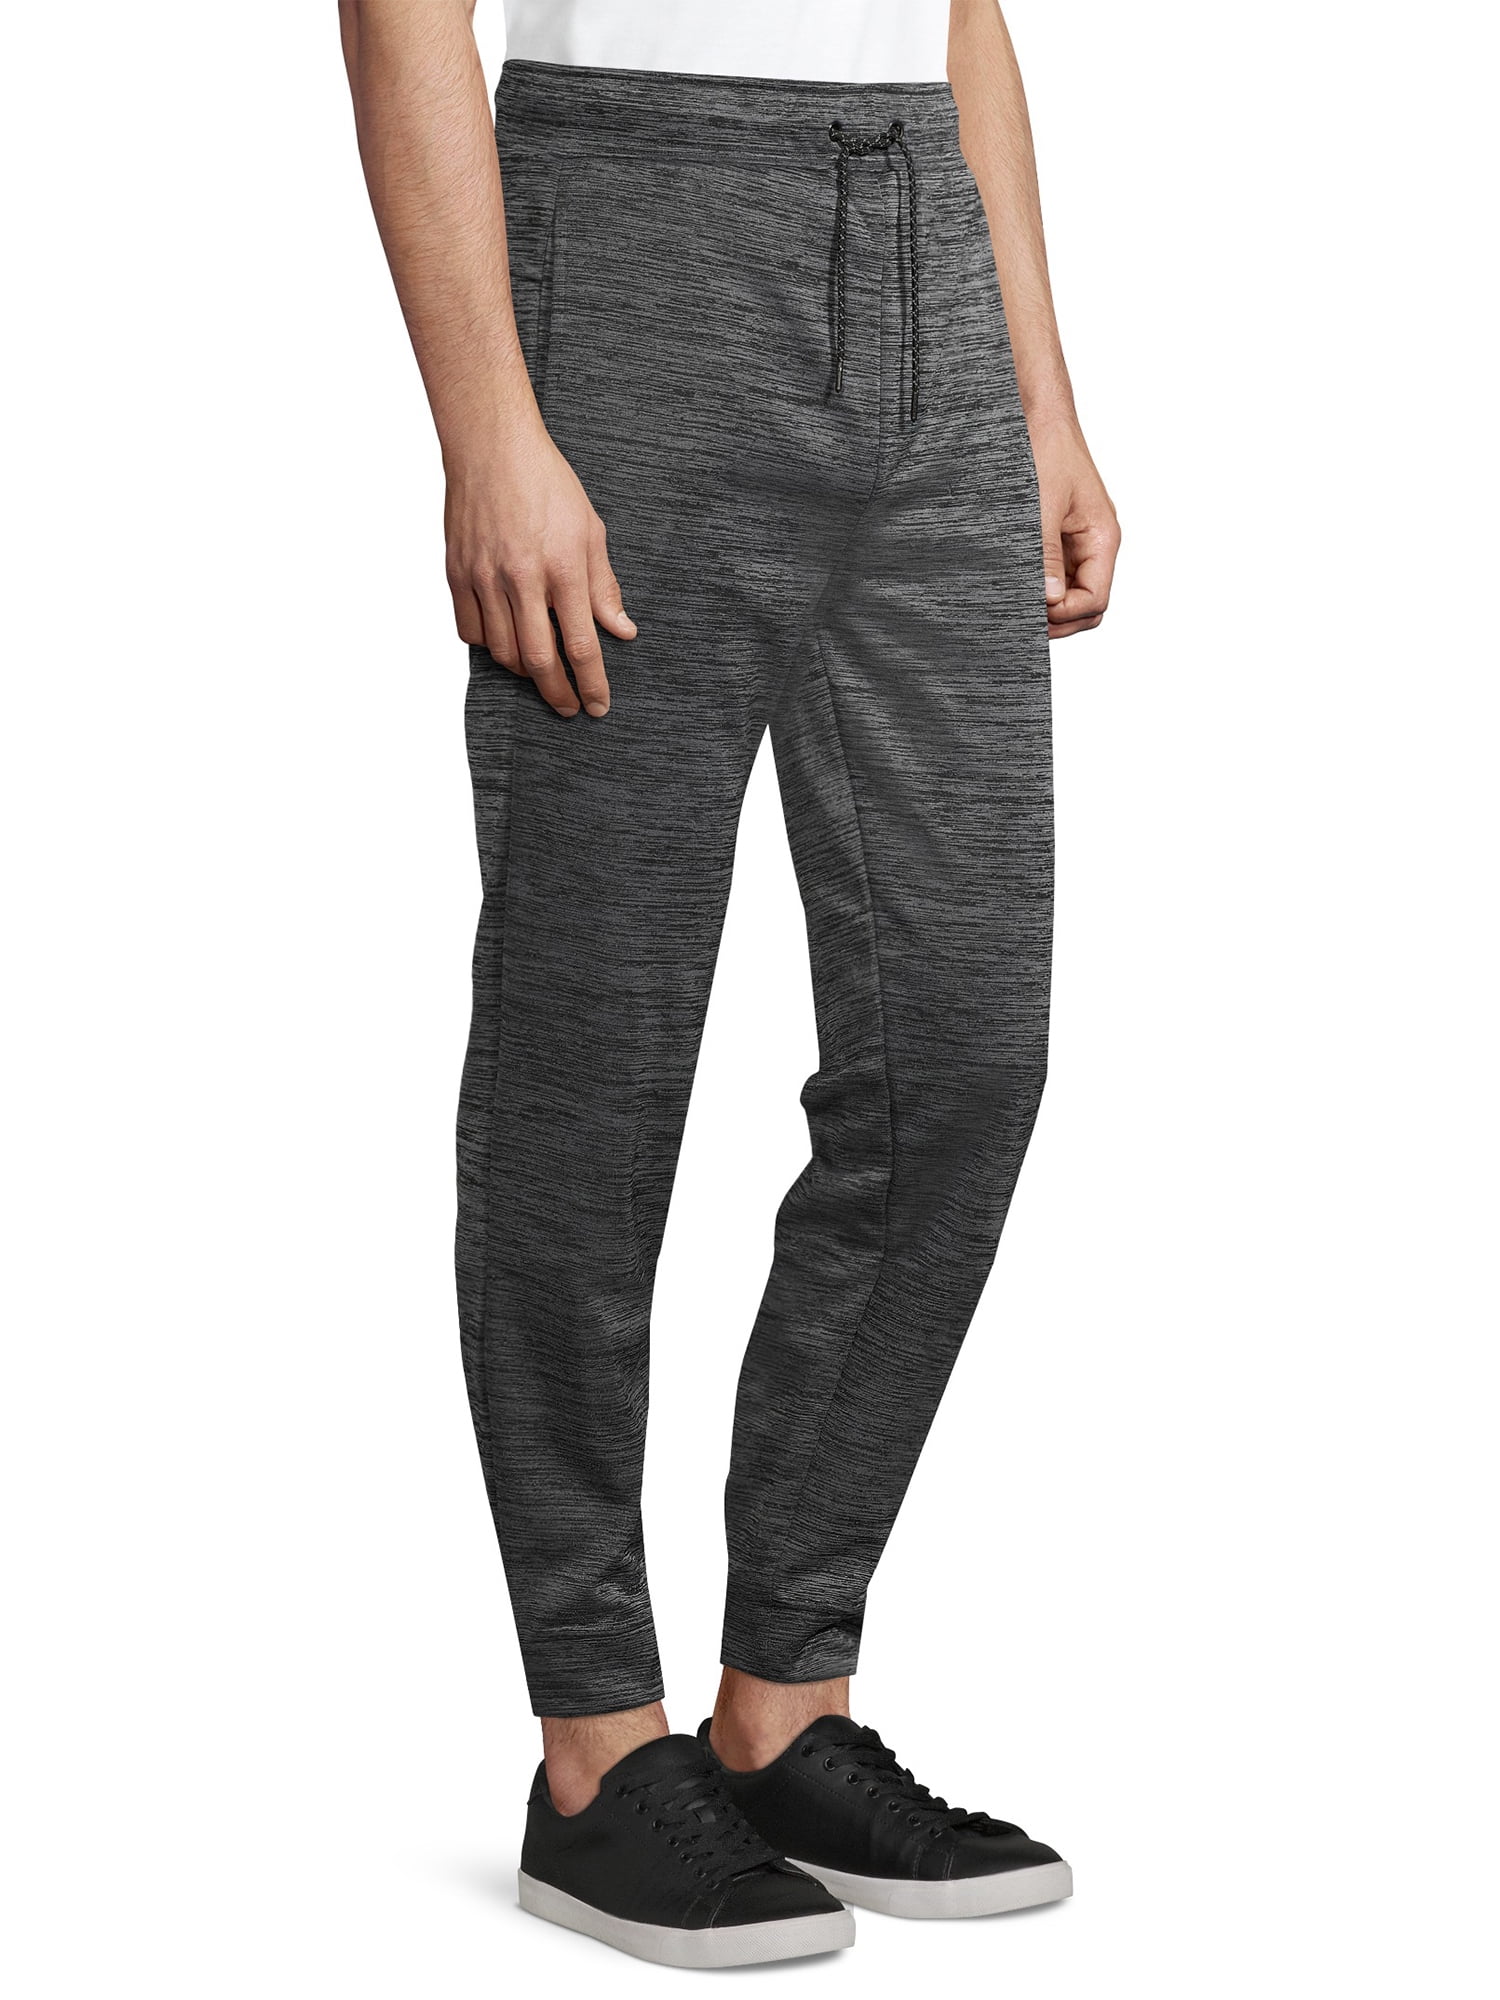 Grey Under Armour Ladies Baseline Fleece Casual Sports Tapered Joggers Bottoms 